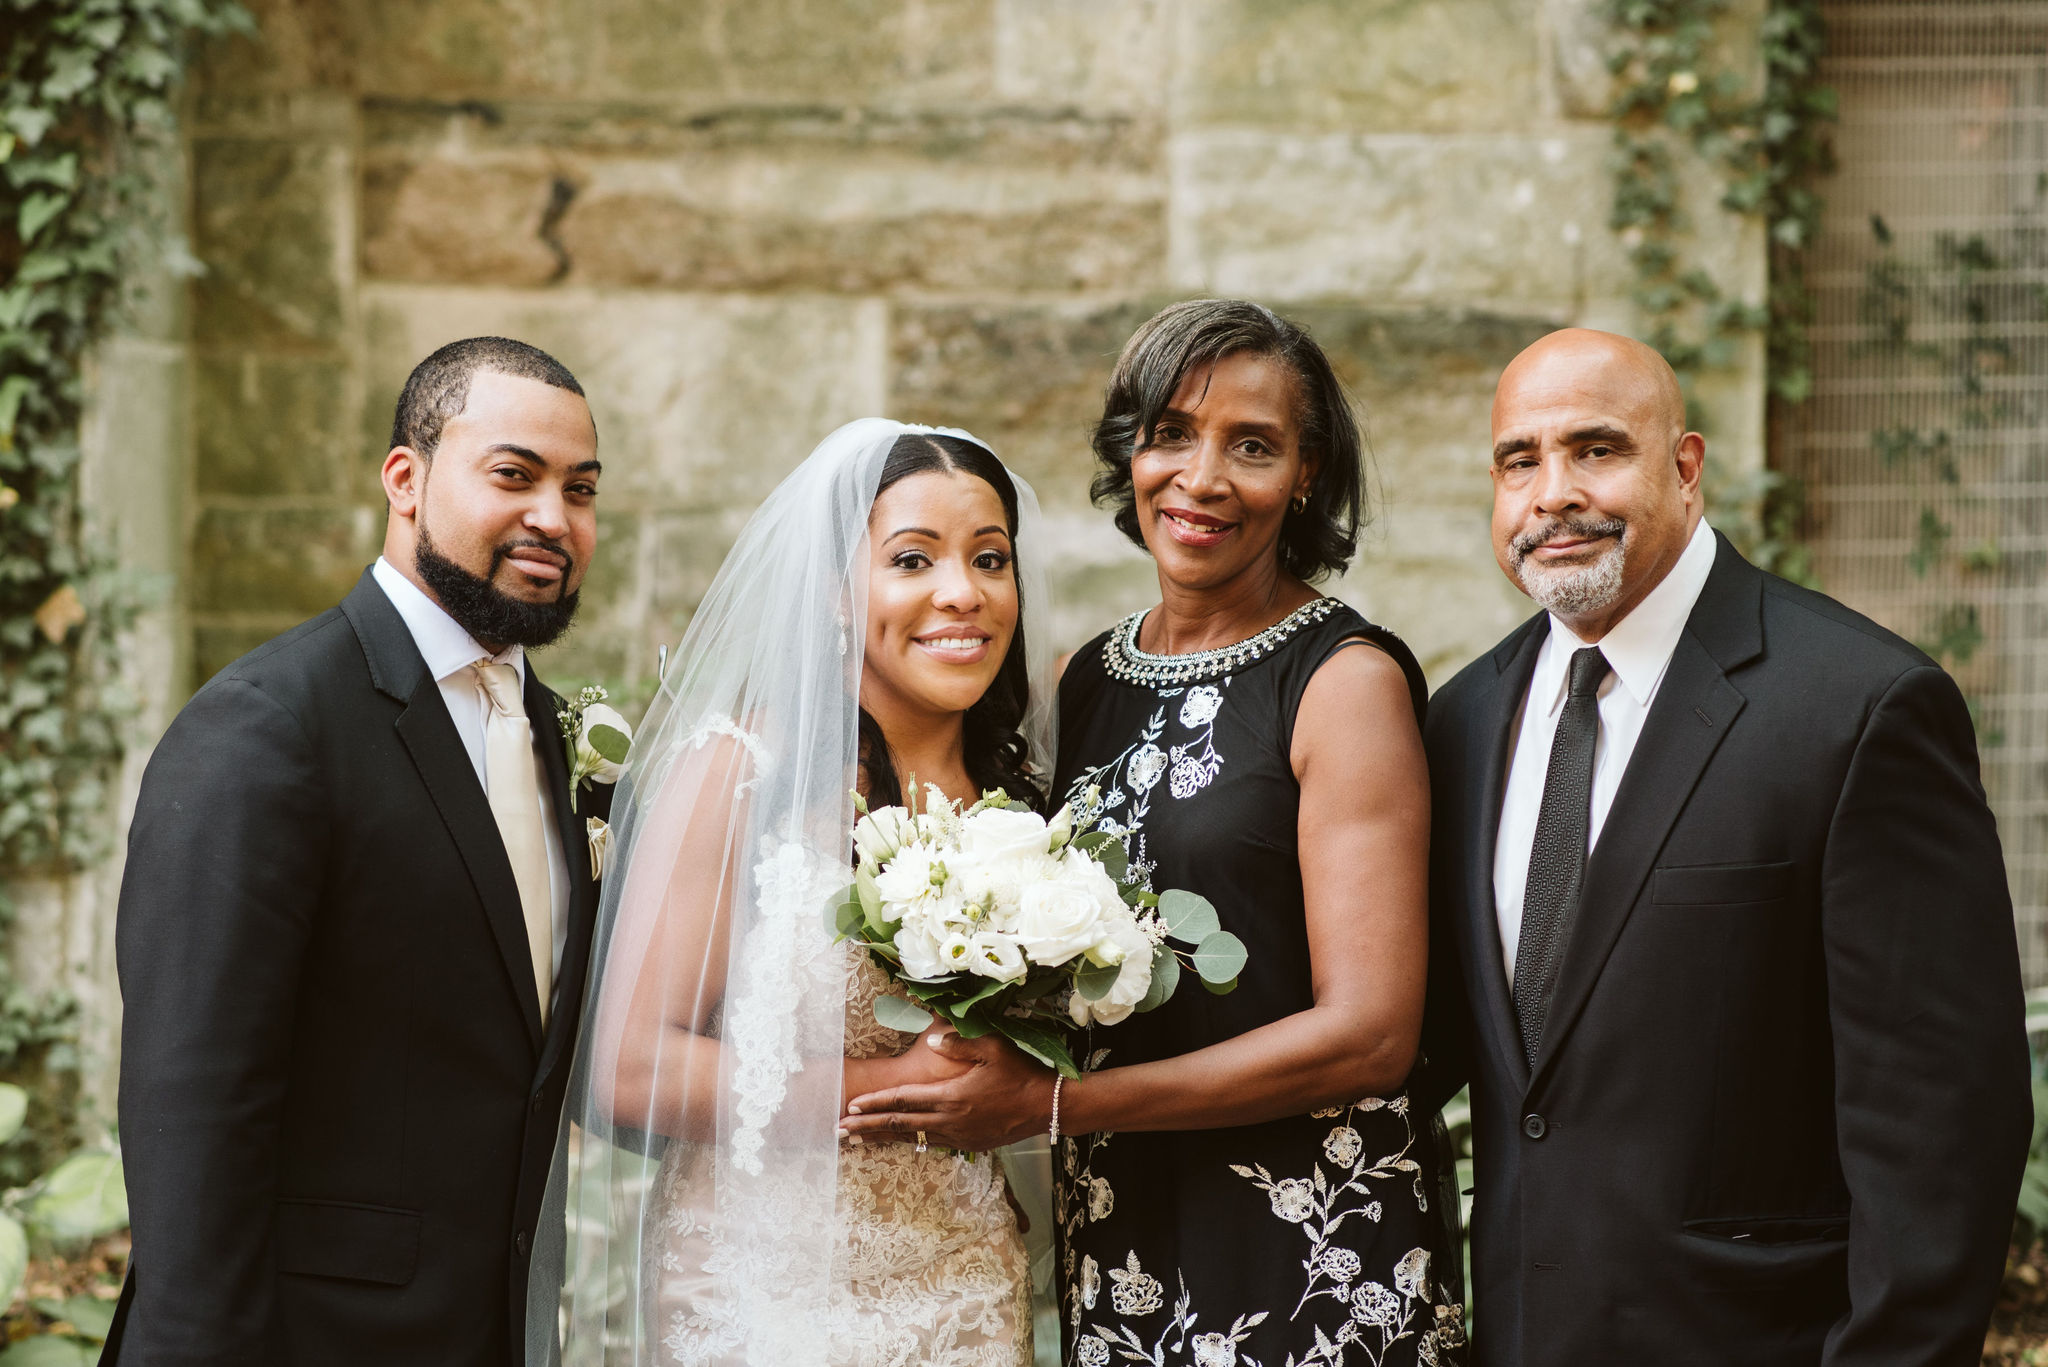  Baltimore, Maryland Wedding Photographer, Mount Vernon, Chase Court, Classic, Outdoor Ceremony, Garden, Romantic, Portrait of Bride and Groom with Bride’s Parents, Mother of the Bride, Father of the Bride 